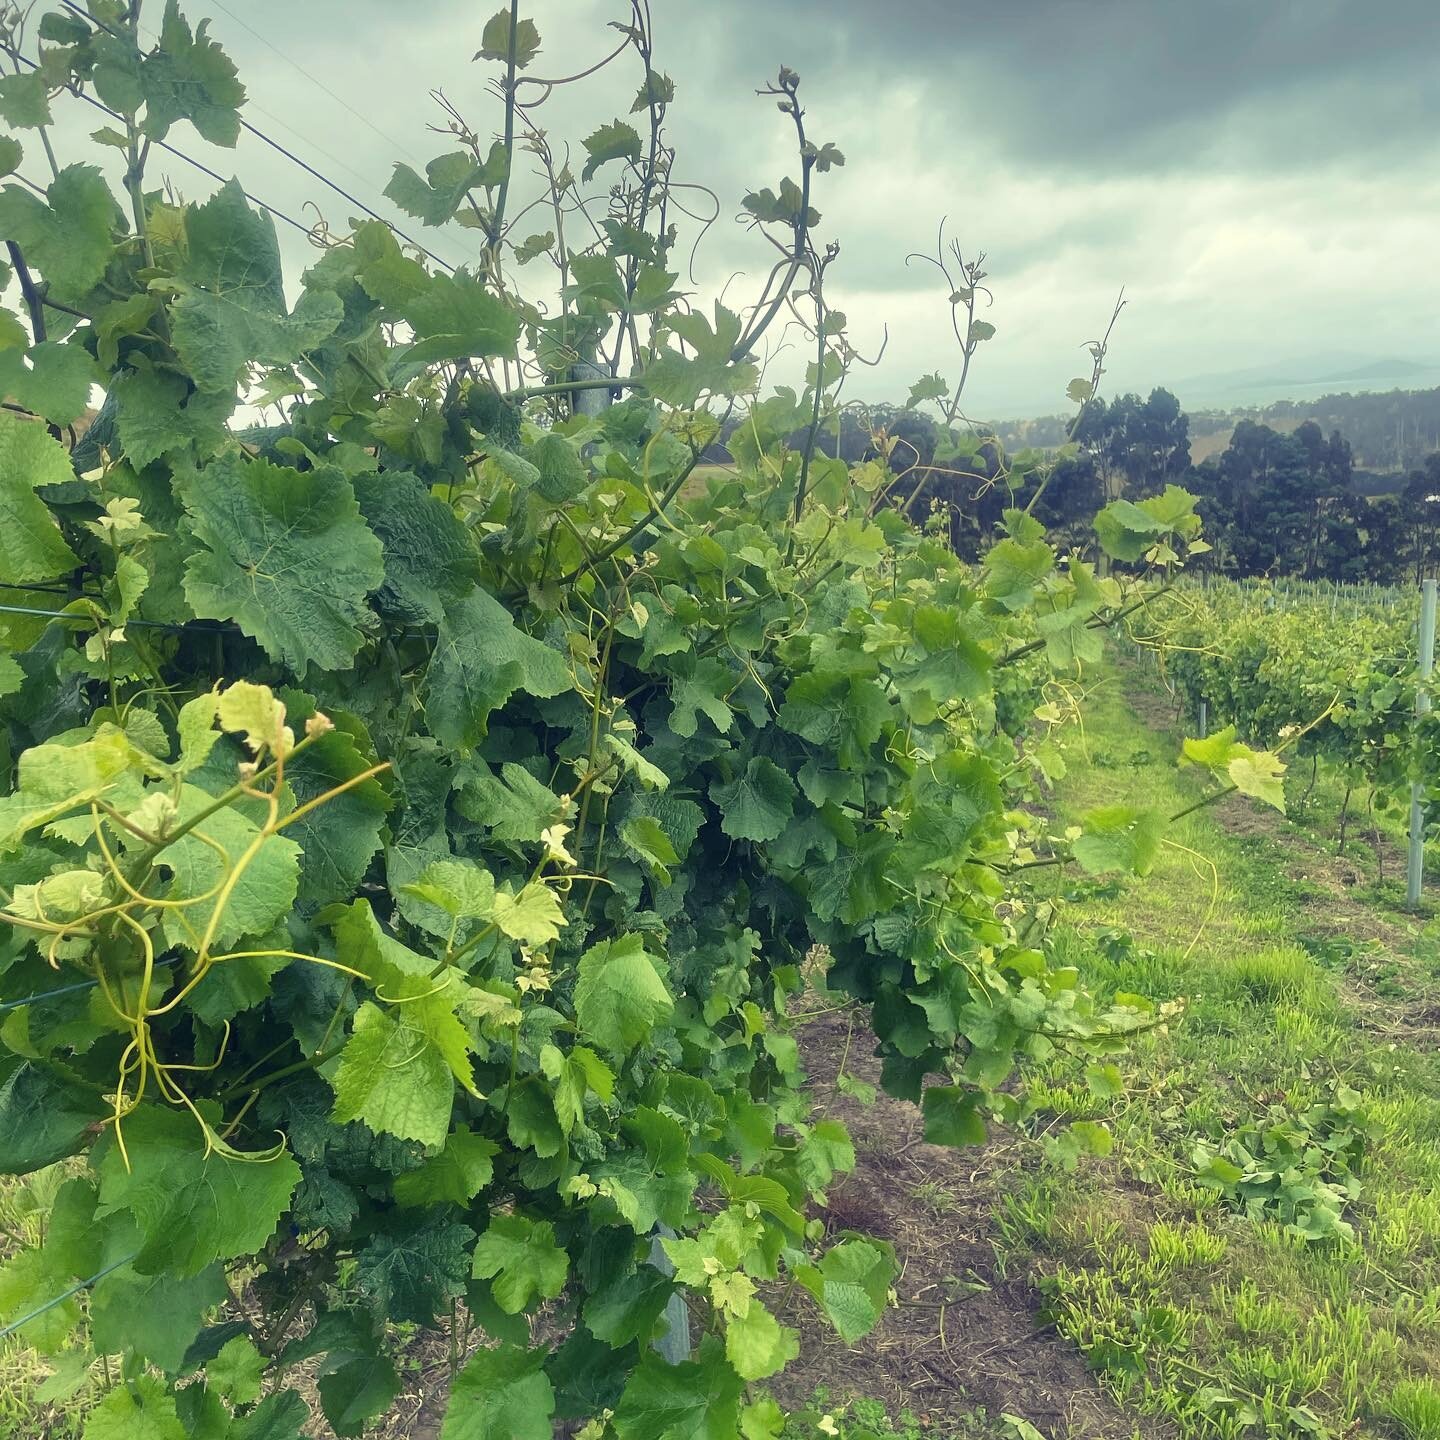 A spot of housekeeping in the vineyard today&hellip; the vines are growing faster than we can tuck them in at the moment! 😅

#summerinthevineyard #canopymanagement #viticulture #tassiewine #pinotnoir #tassiesparkling #vintage2022inthemaking